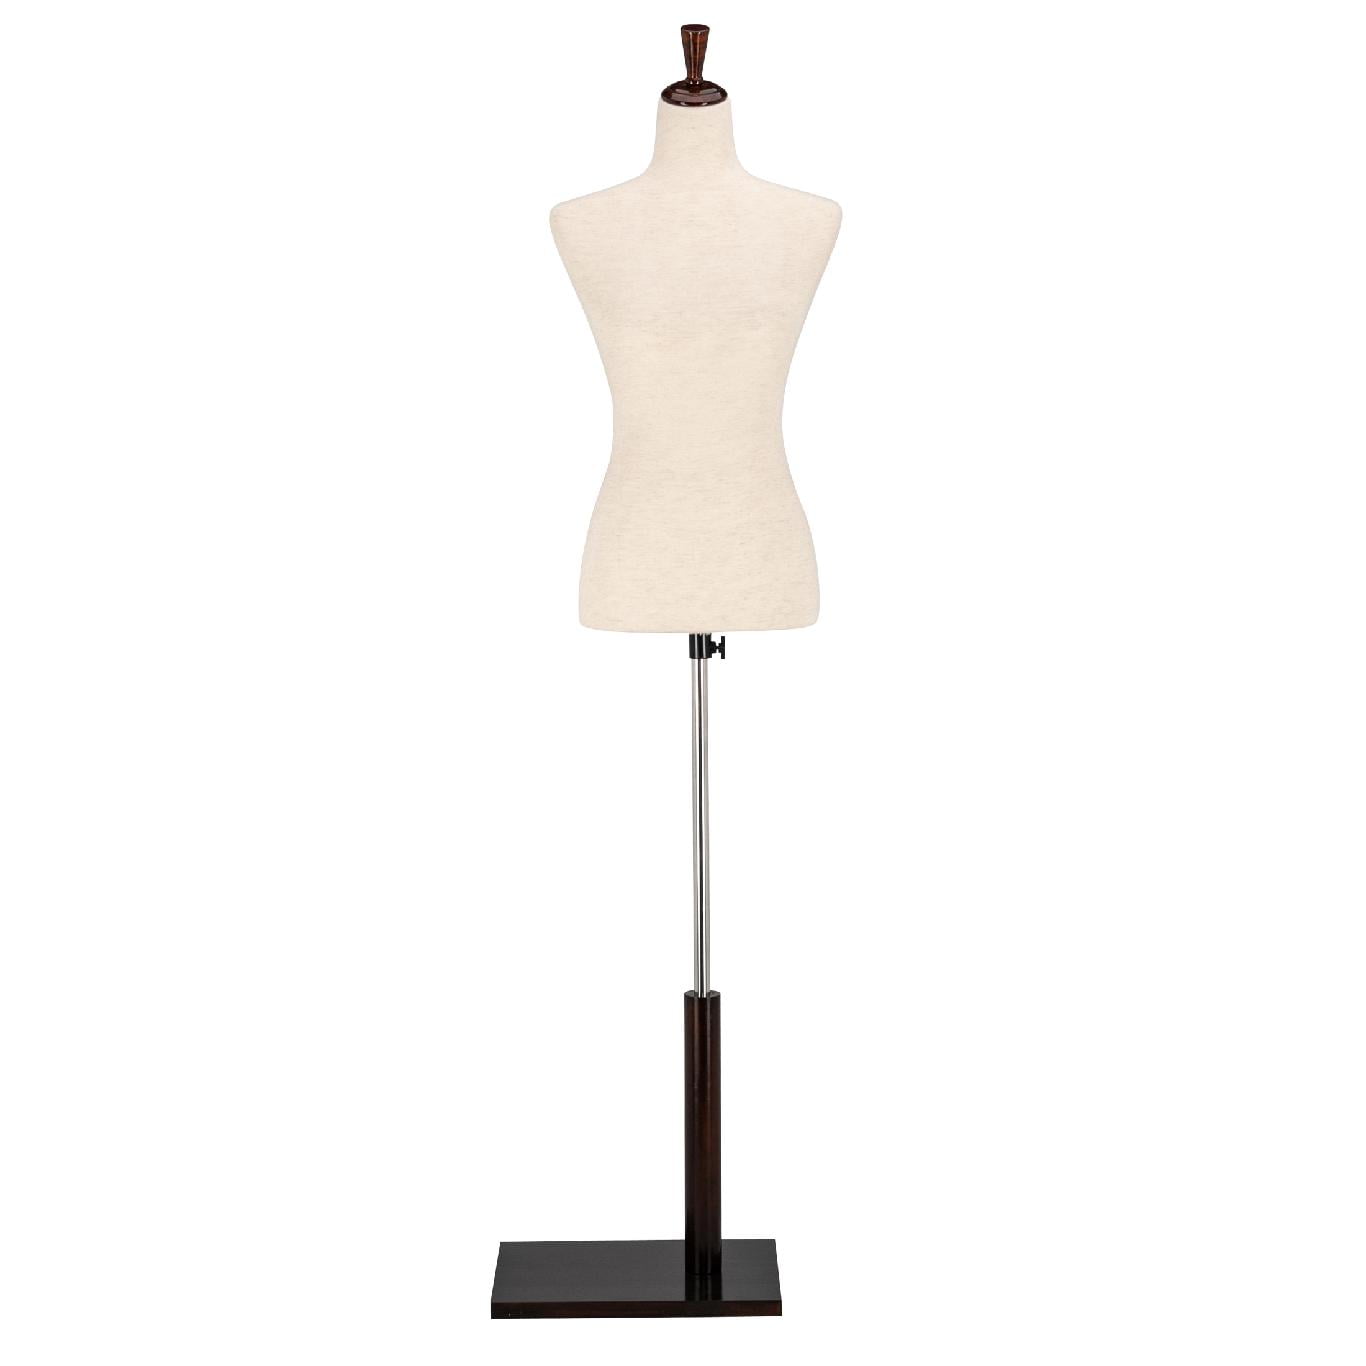 Mefeir White Female Mannequin Torso Dress Form Clothing Display Forms Half Women Body with Tripod Wooden Base Stand Lady Adjust Height Model for Room Decor,Store Window,Trade Shows 